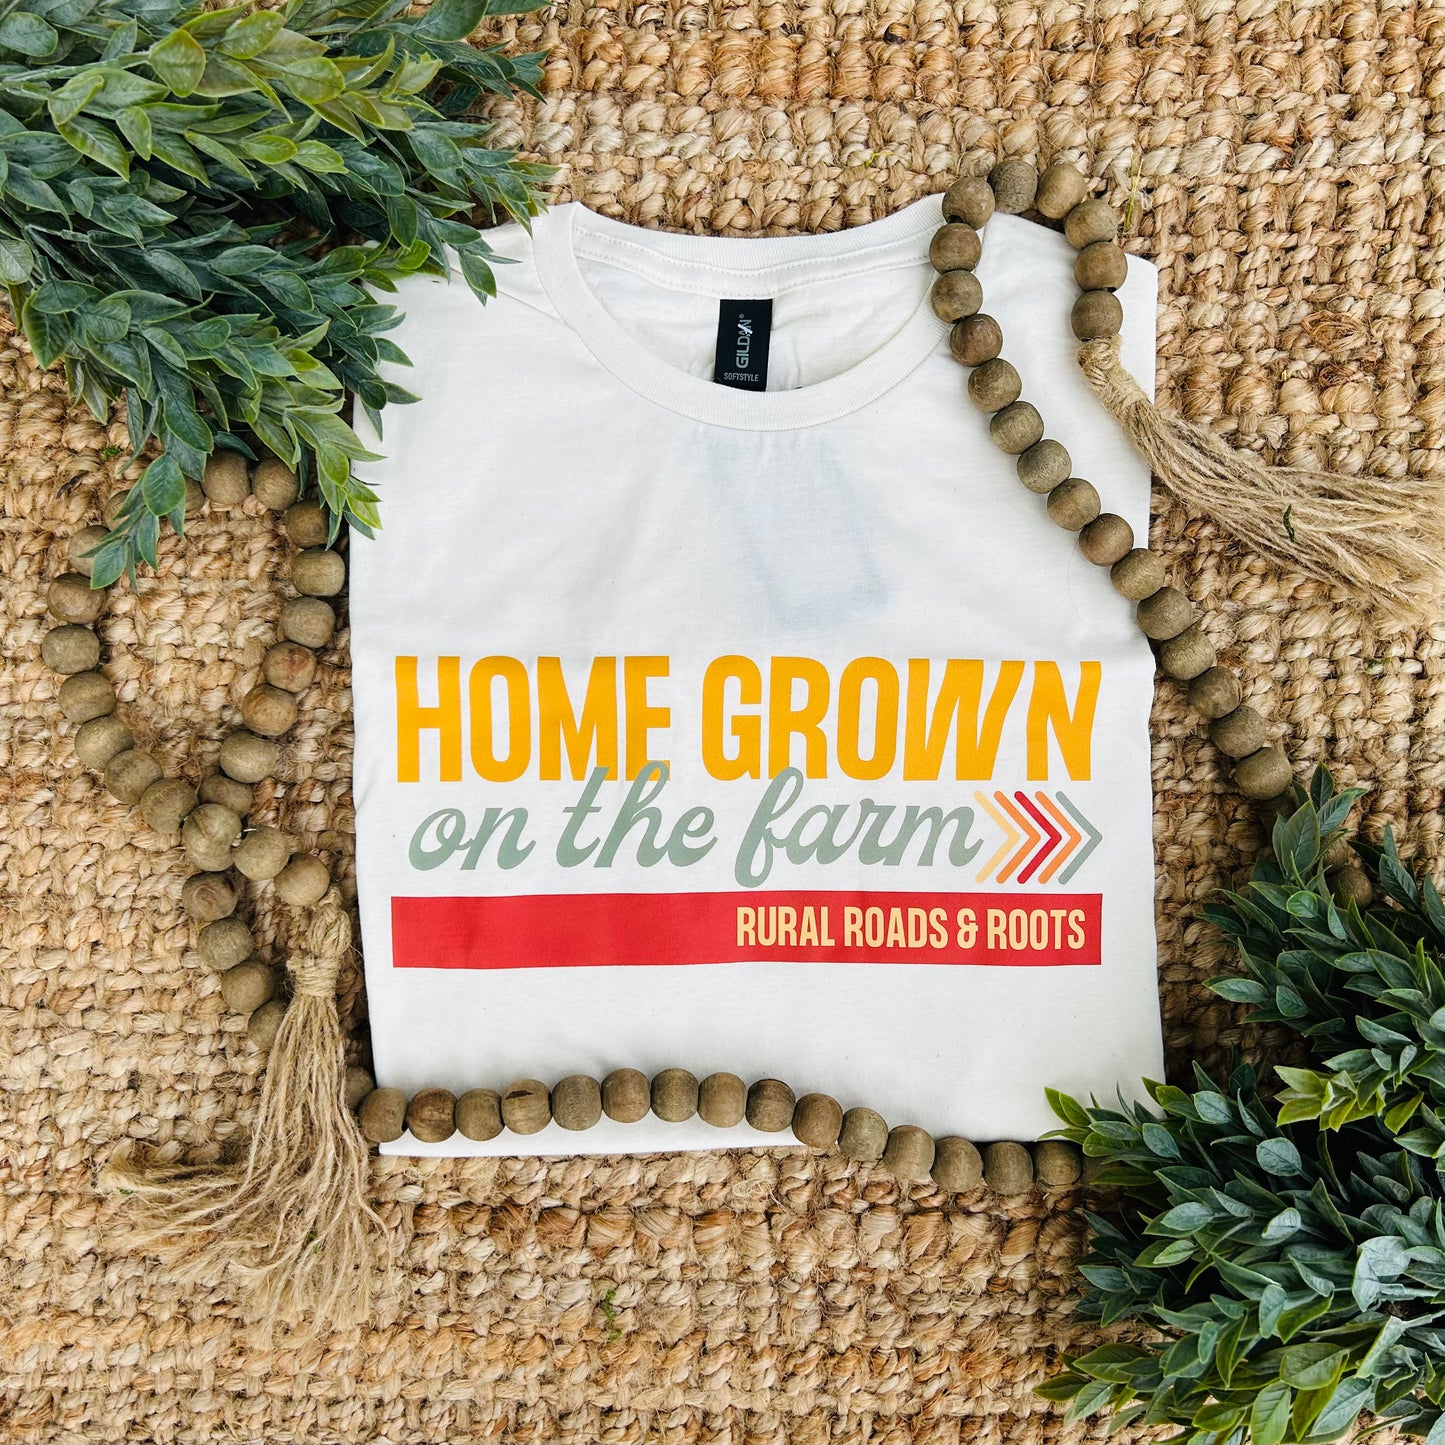 Home Grown Graphic Tee